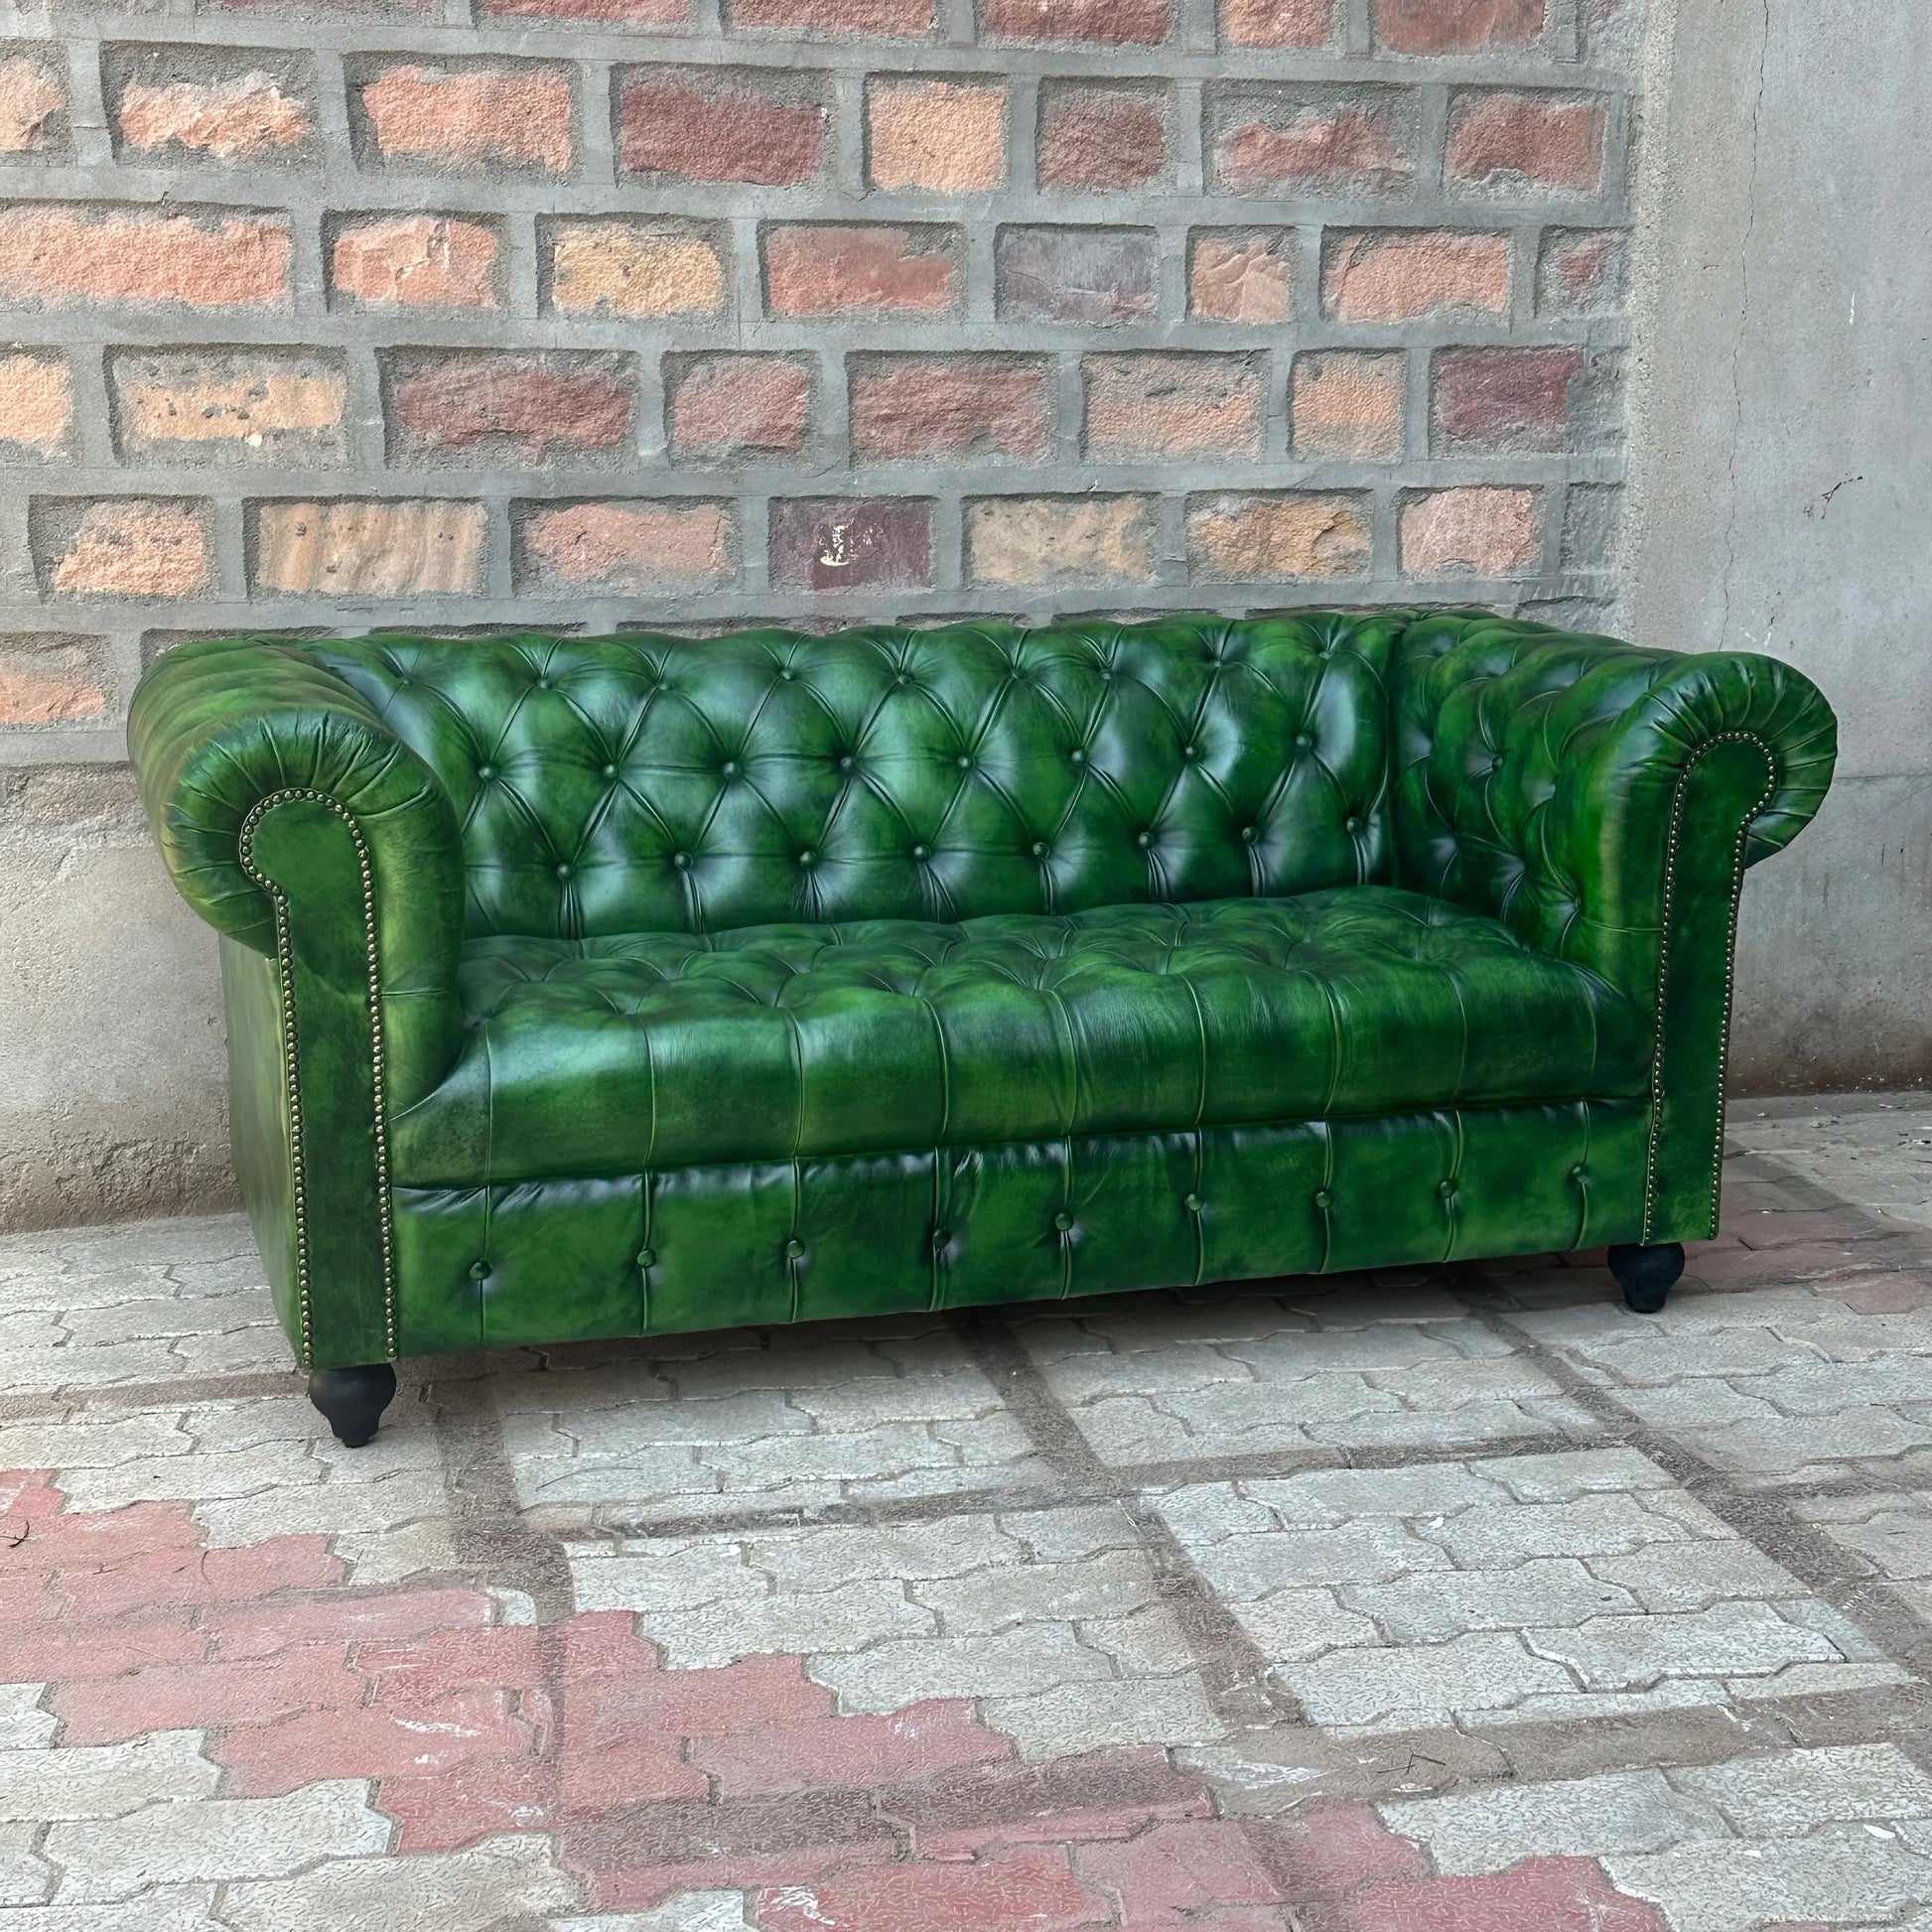 71" Loveseat Tufted Bench | Polo Green Chesterfield Leather Loveseat with Tufted Bench Seat (PG-2T) by Rising Tide Design Co.